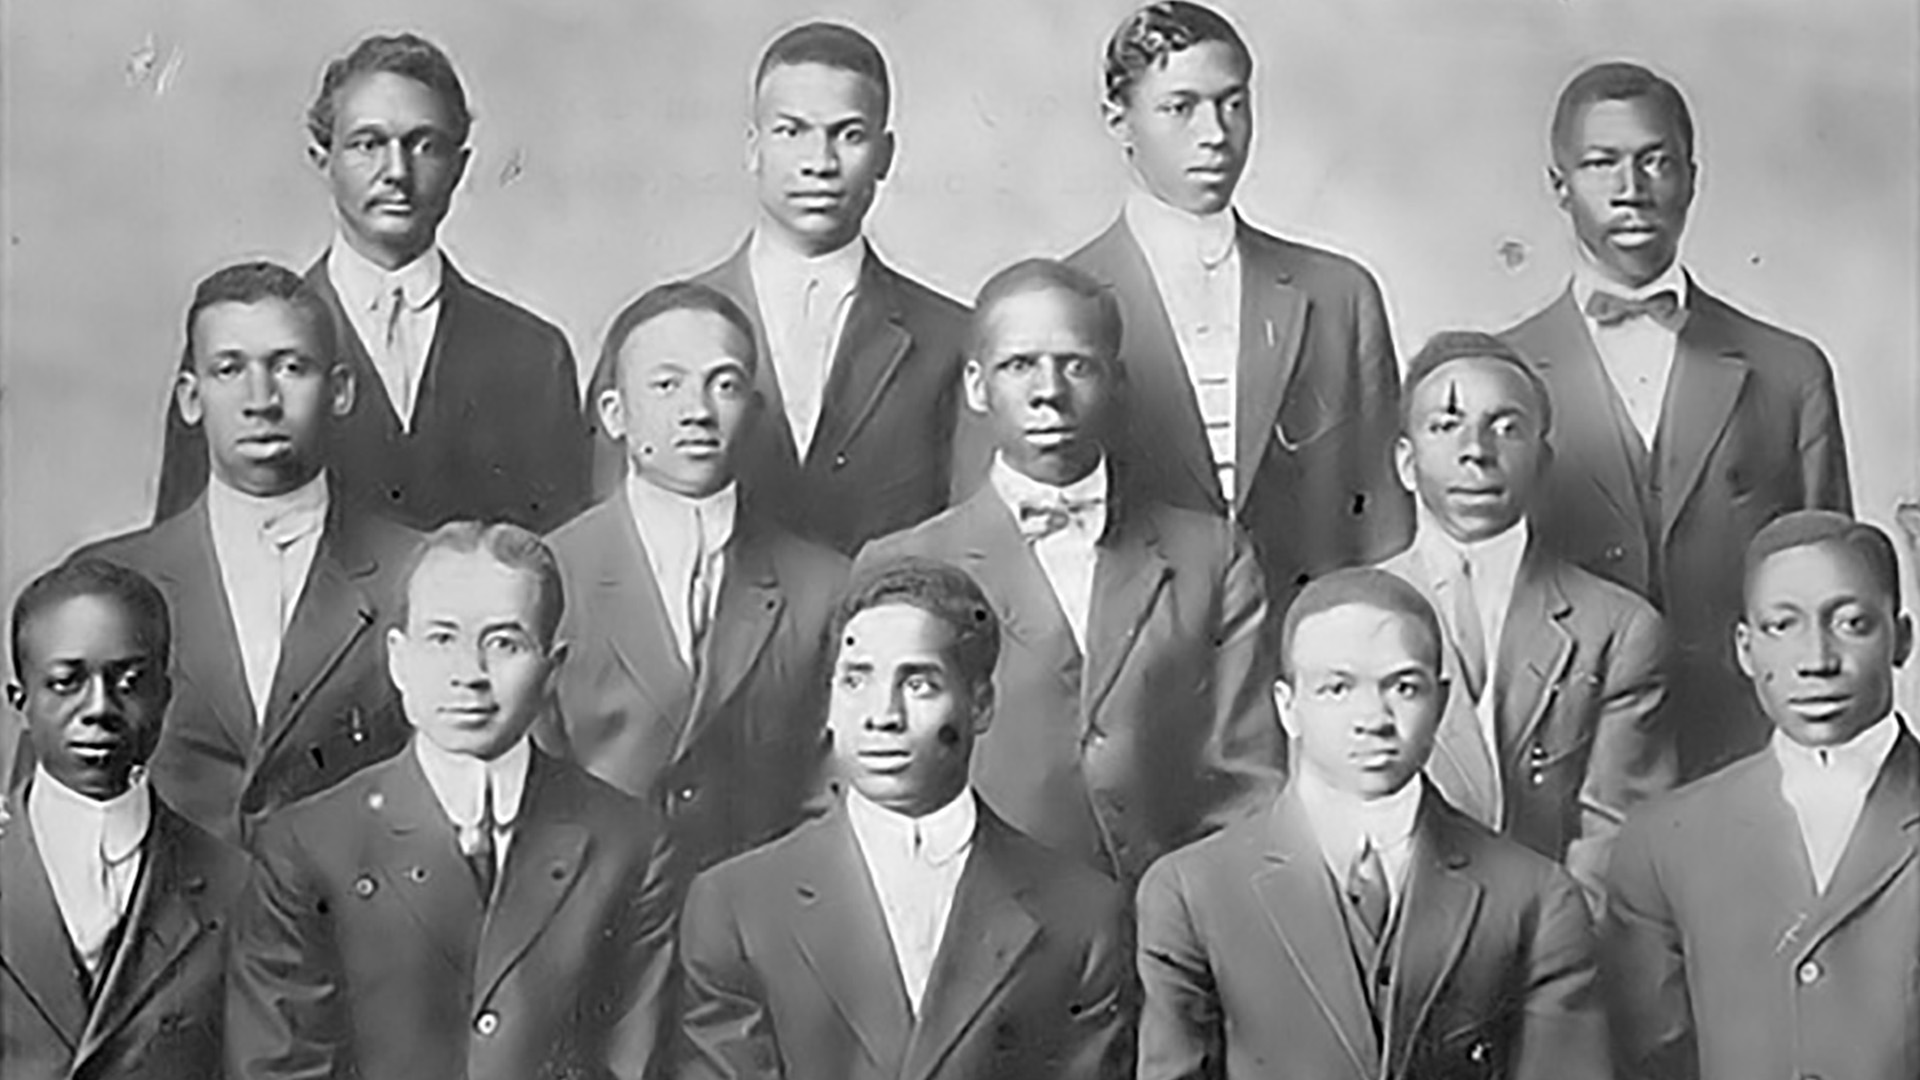 The Alpha Chapter of Kappa Alpha Psi Fraternity, Inc. in 1913.